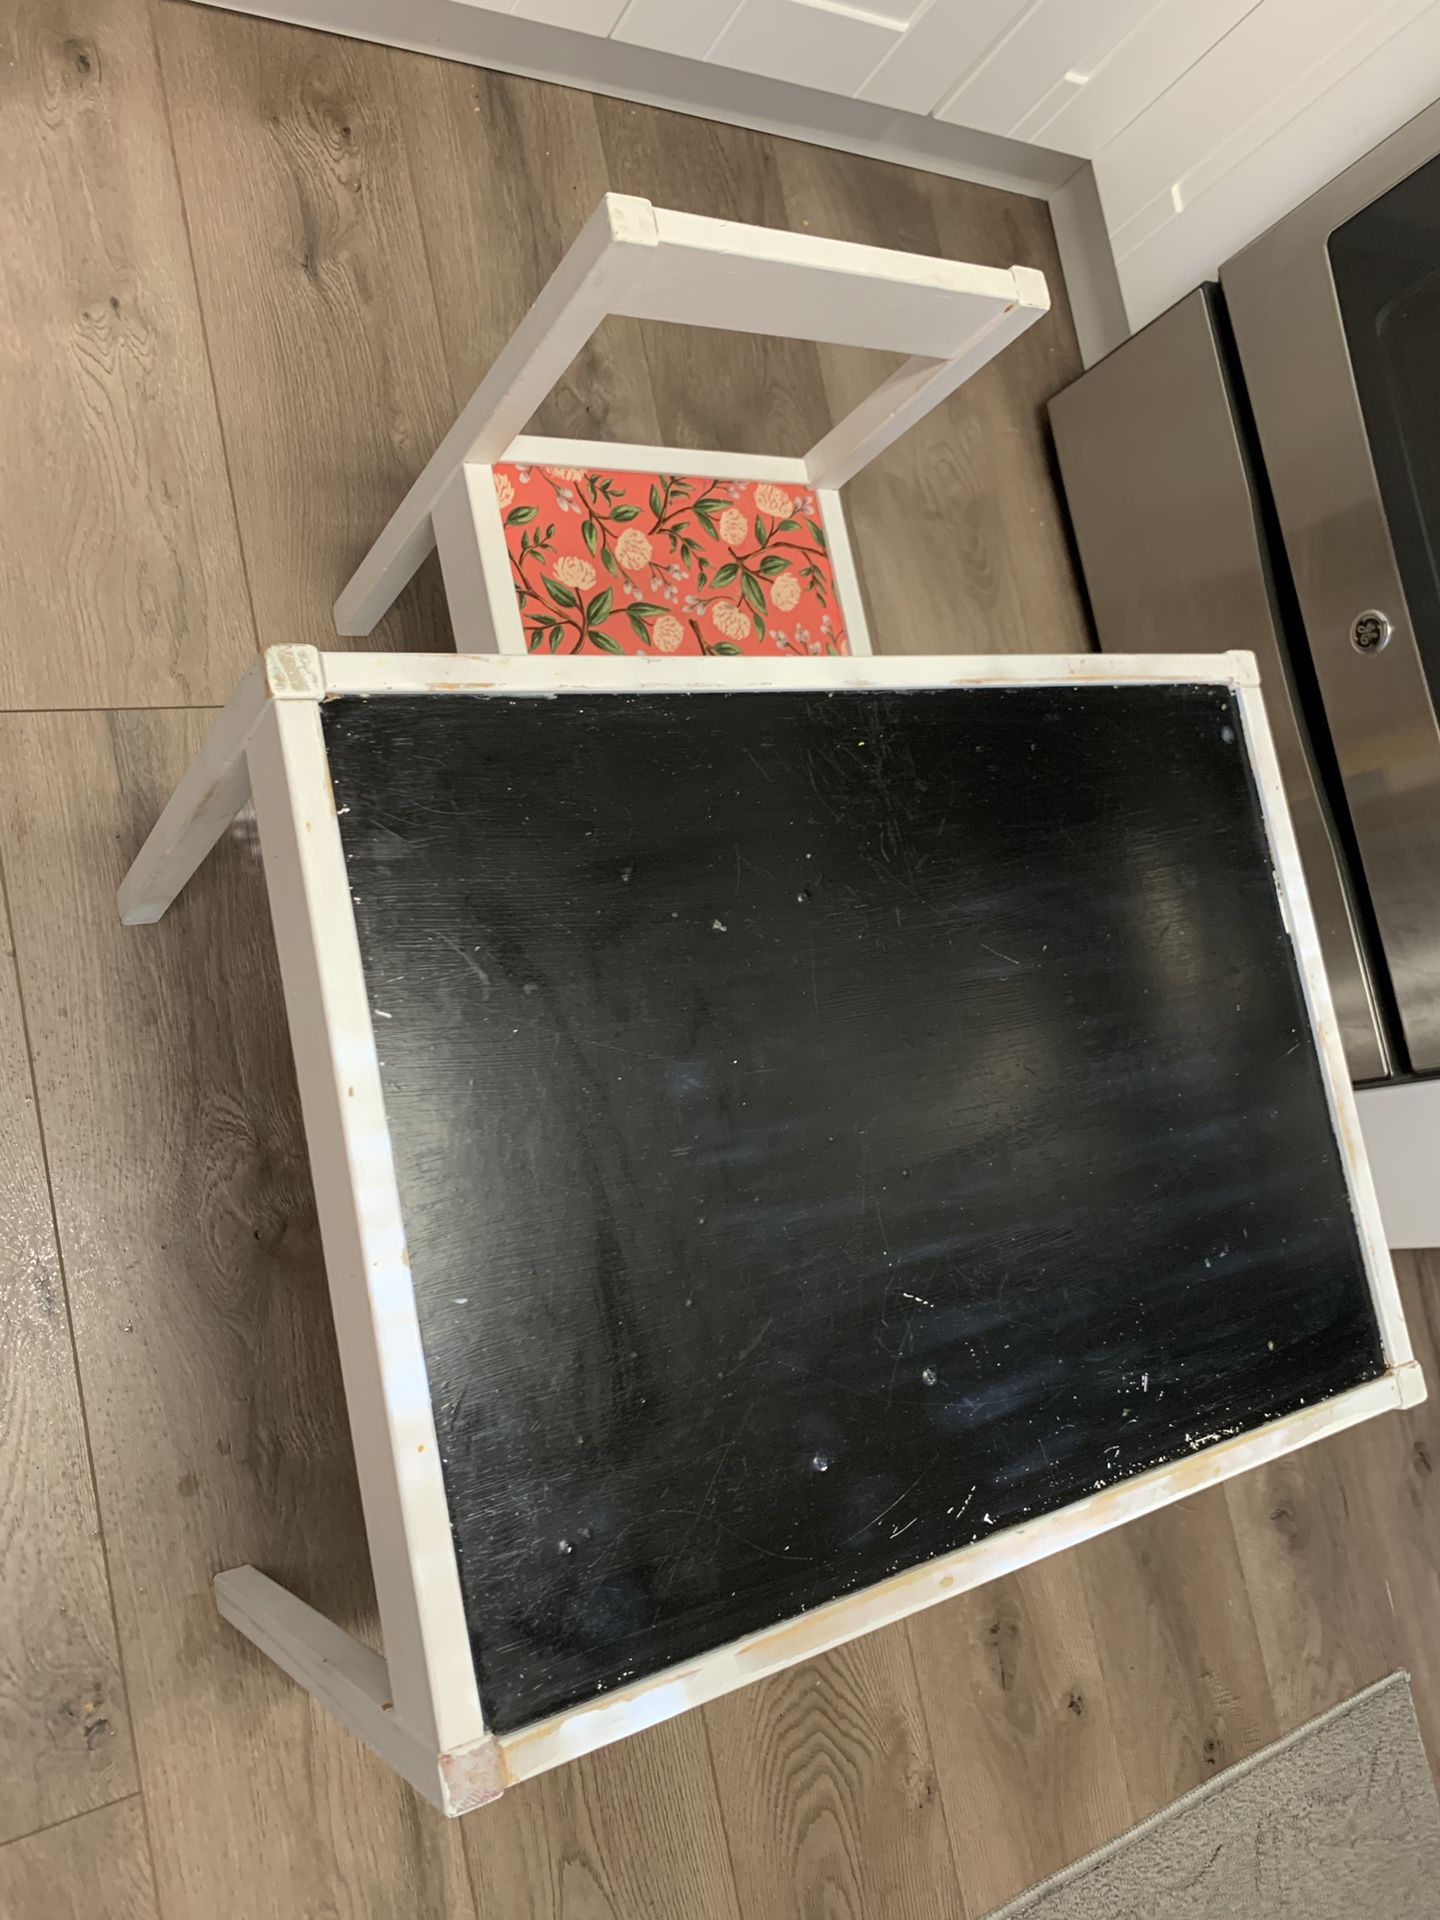 IKEA kids table with one chair it’s for $15